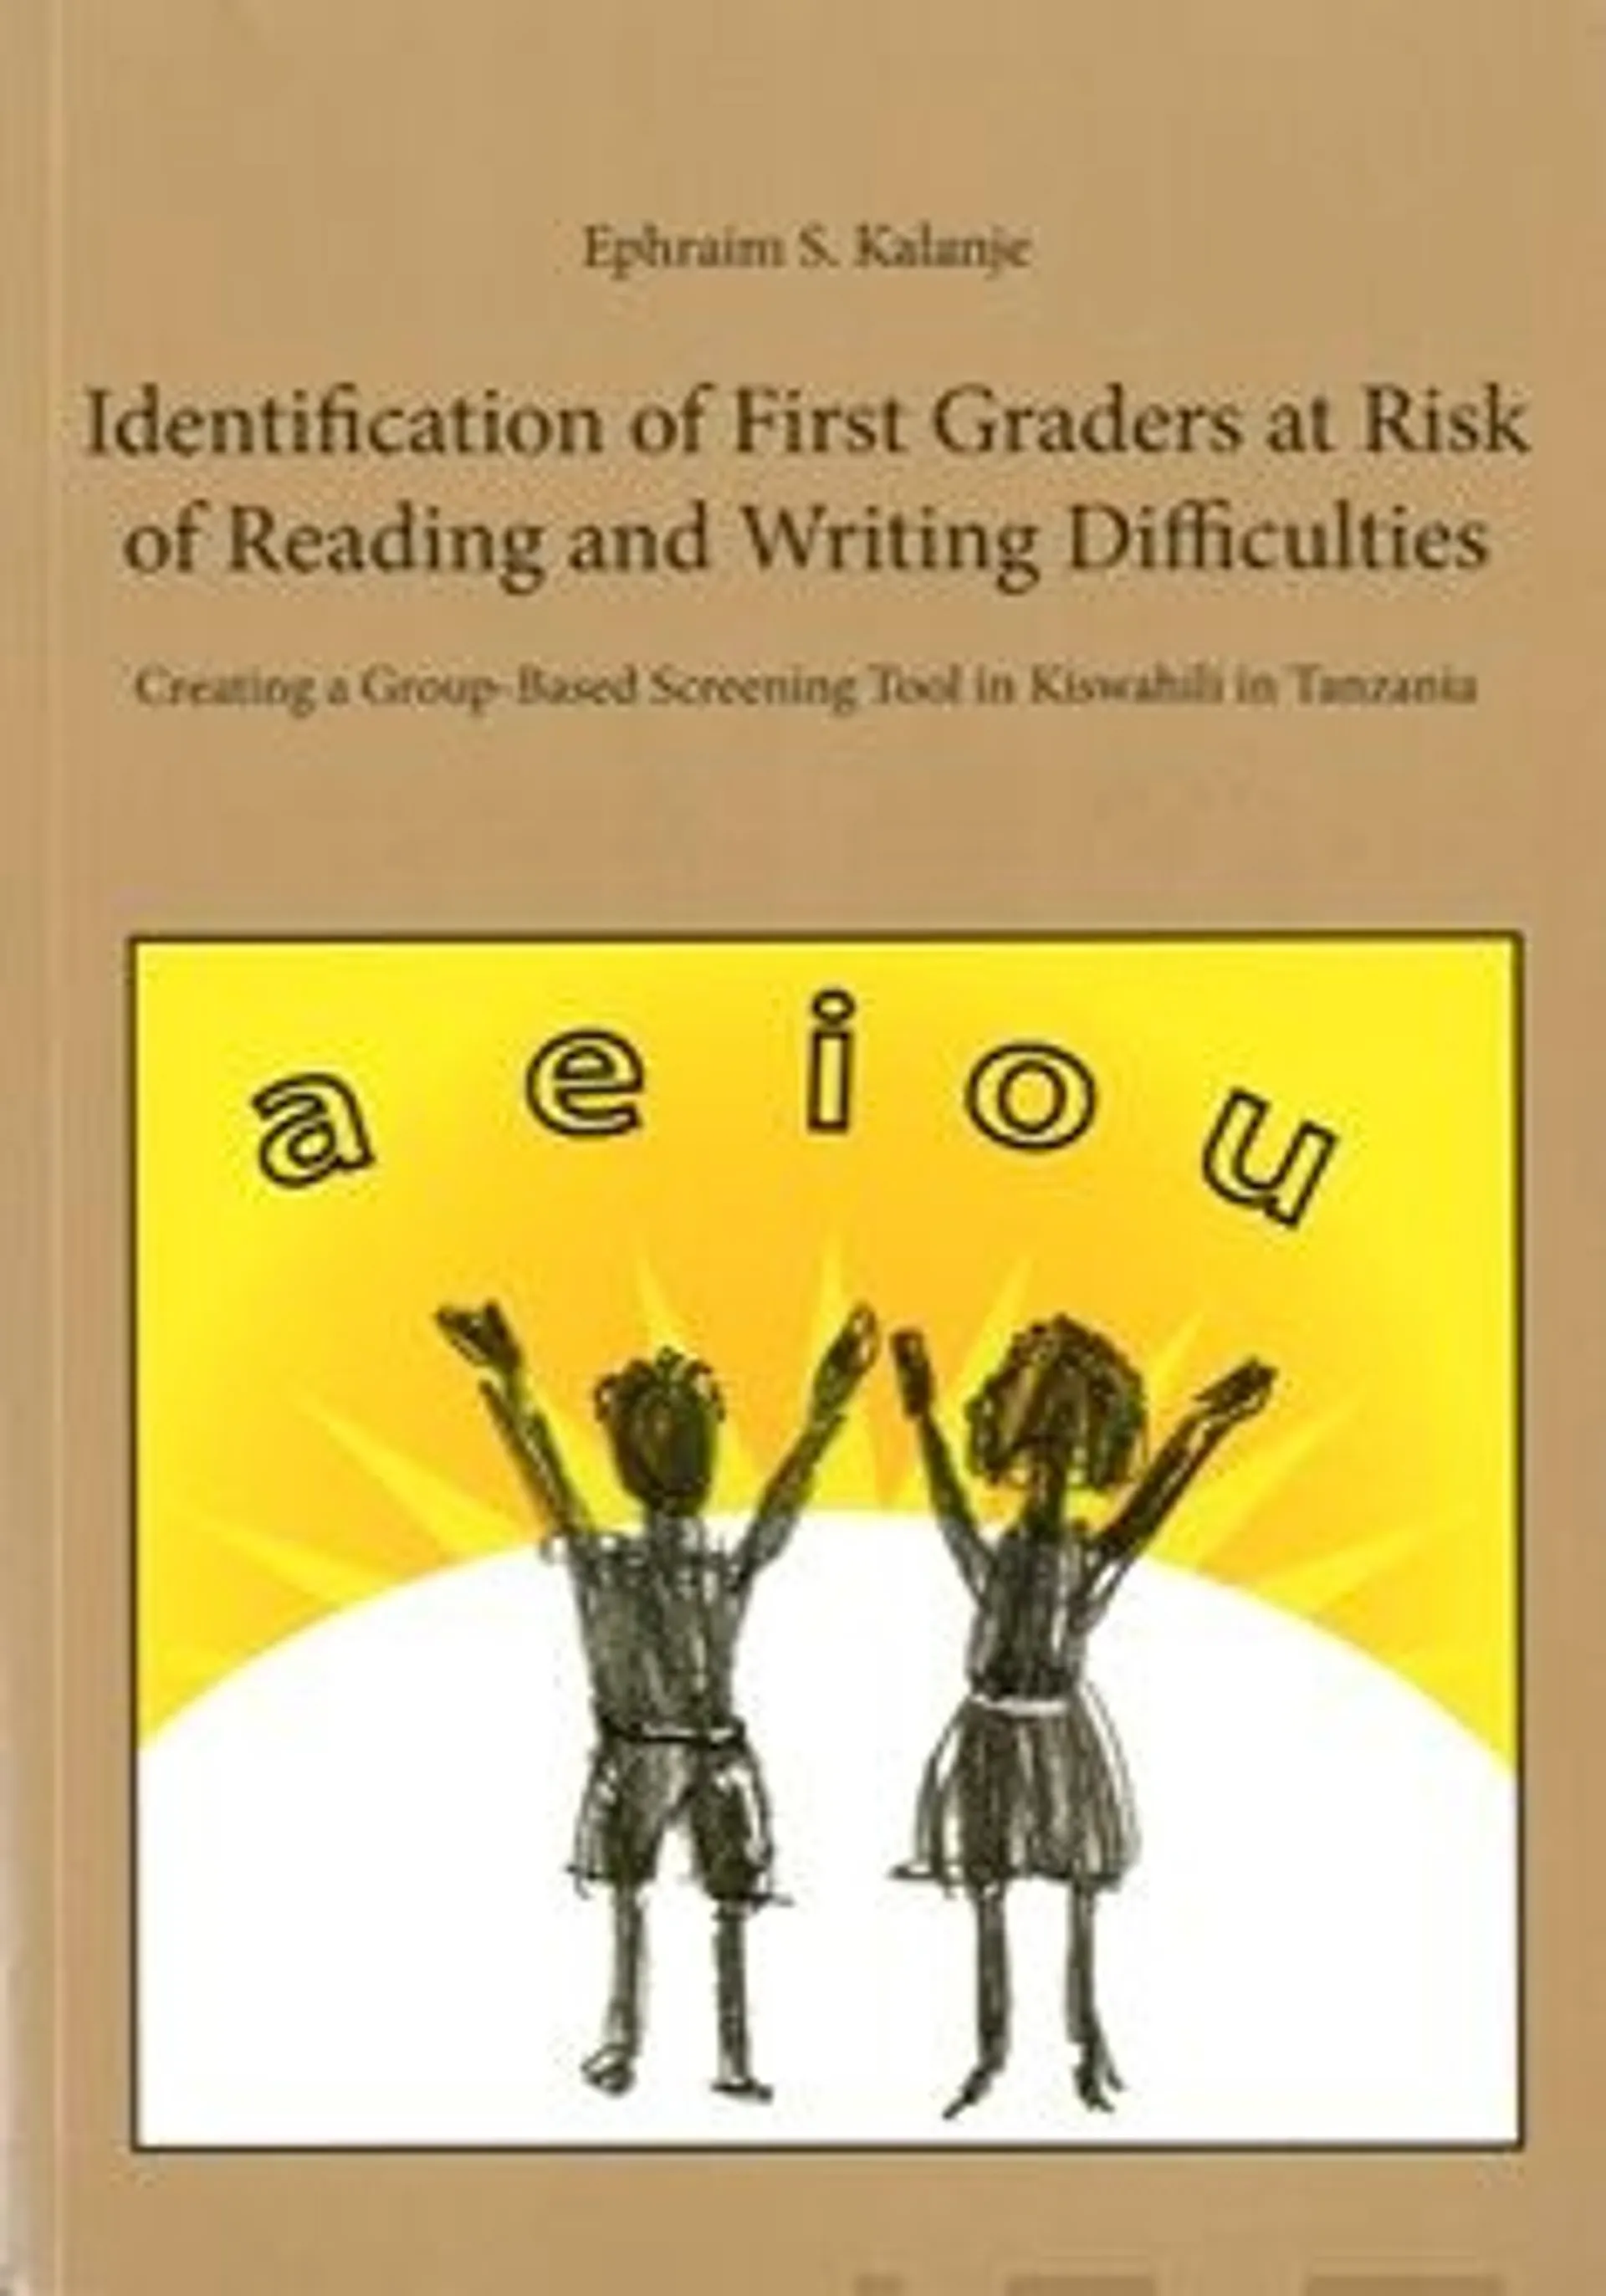 Kalanje, Identification of First Graders at Risk of Reading and Writing Difficulties